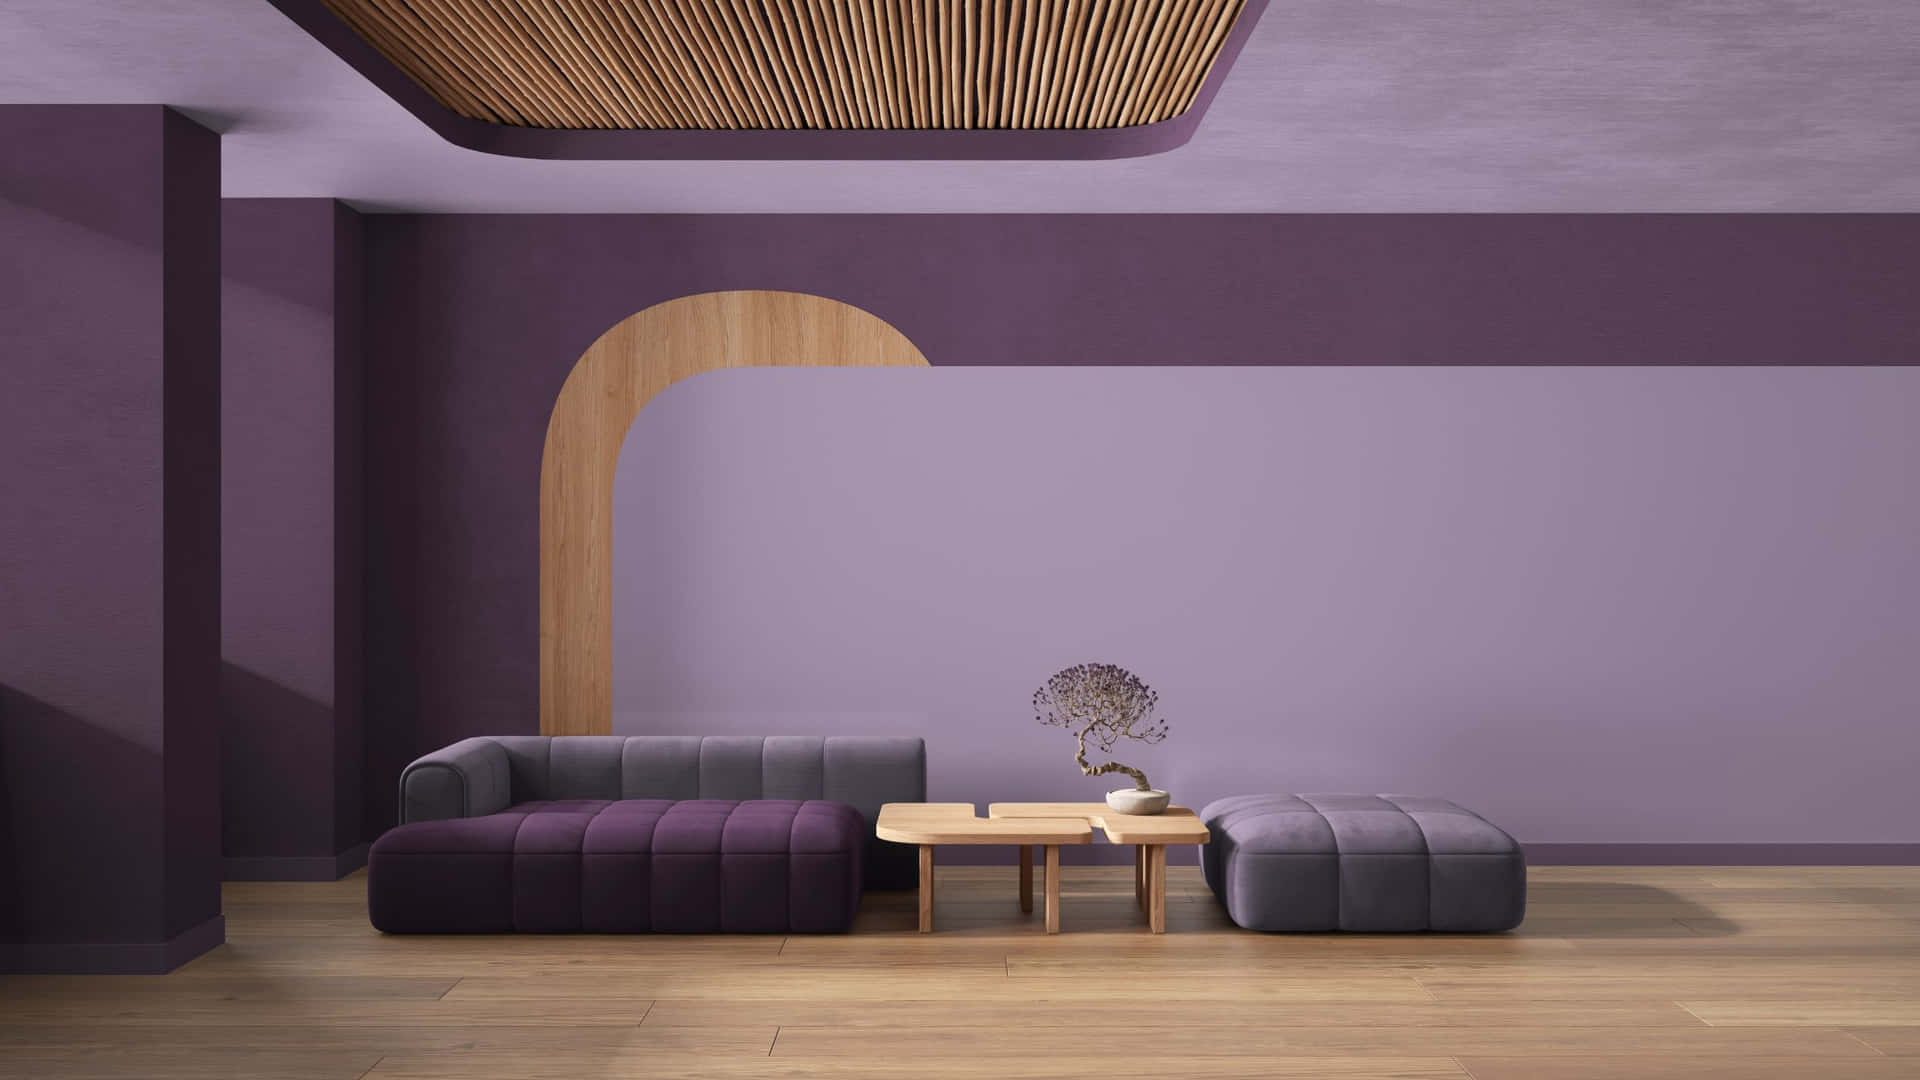 A Room With Purple Walls And A Wooden Floor